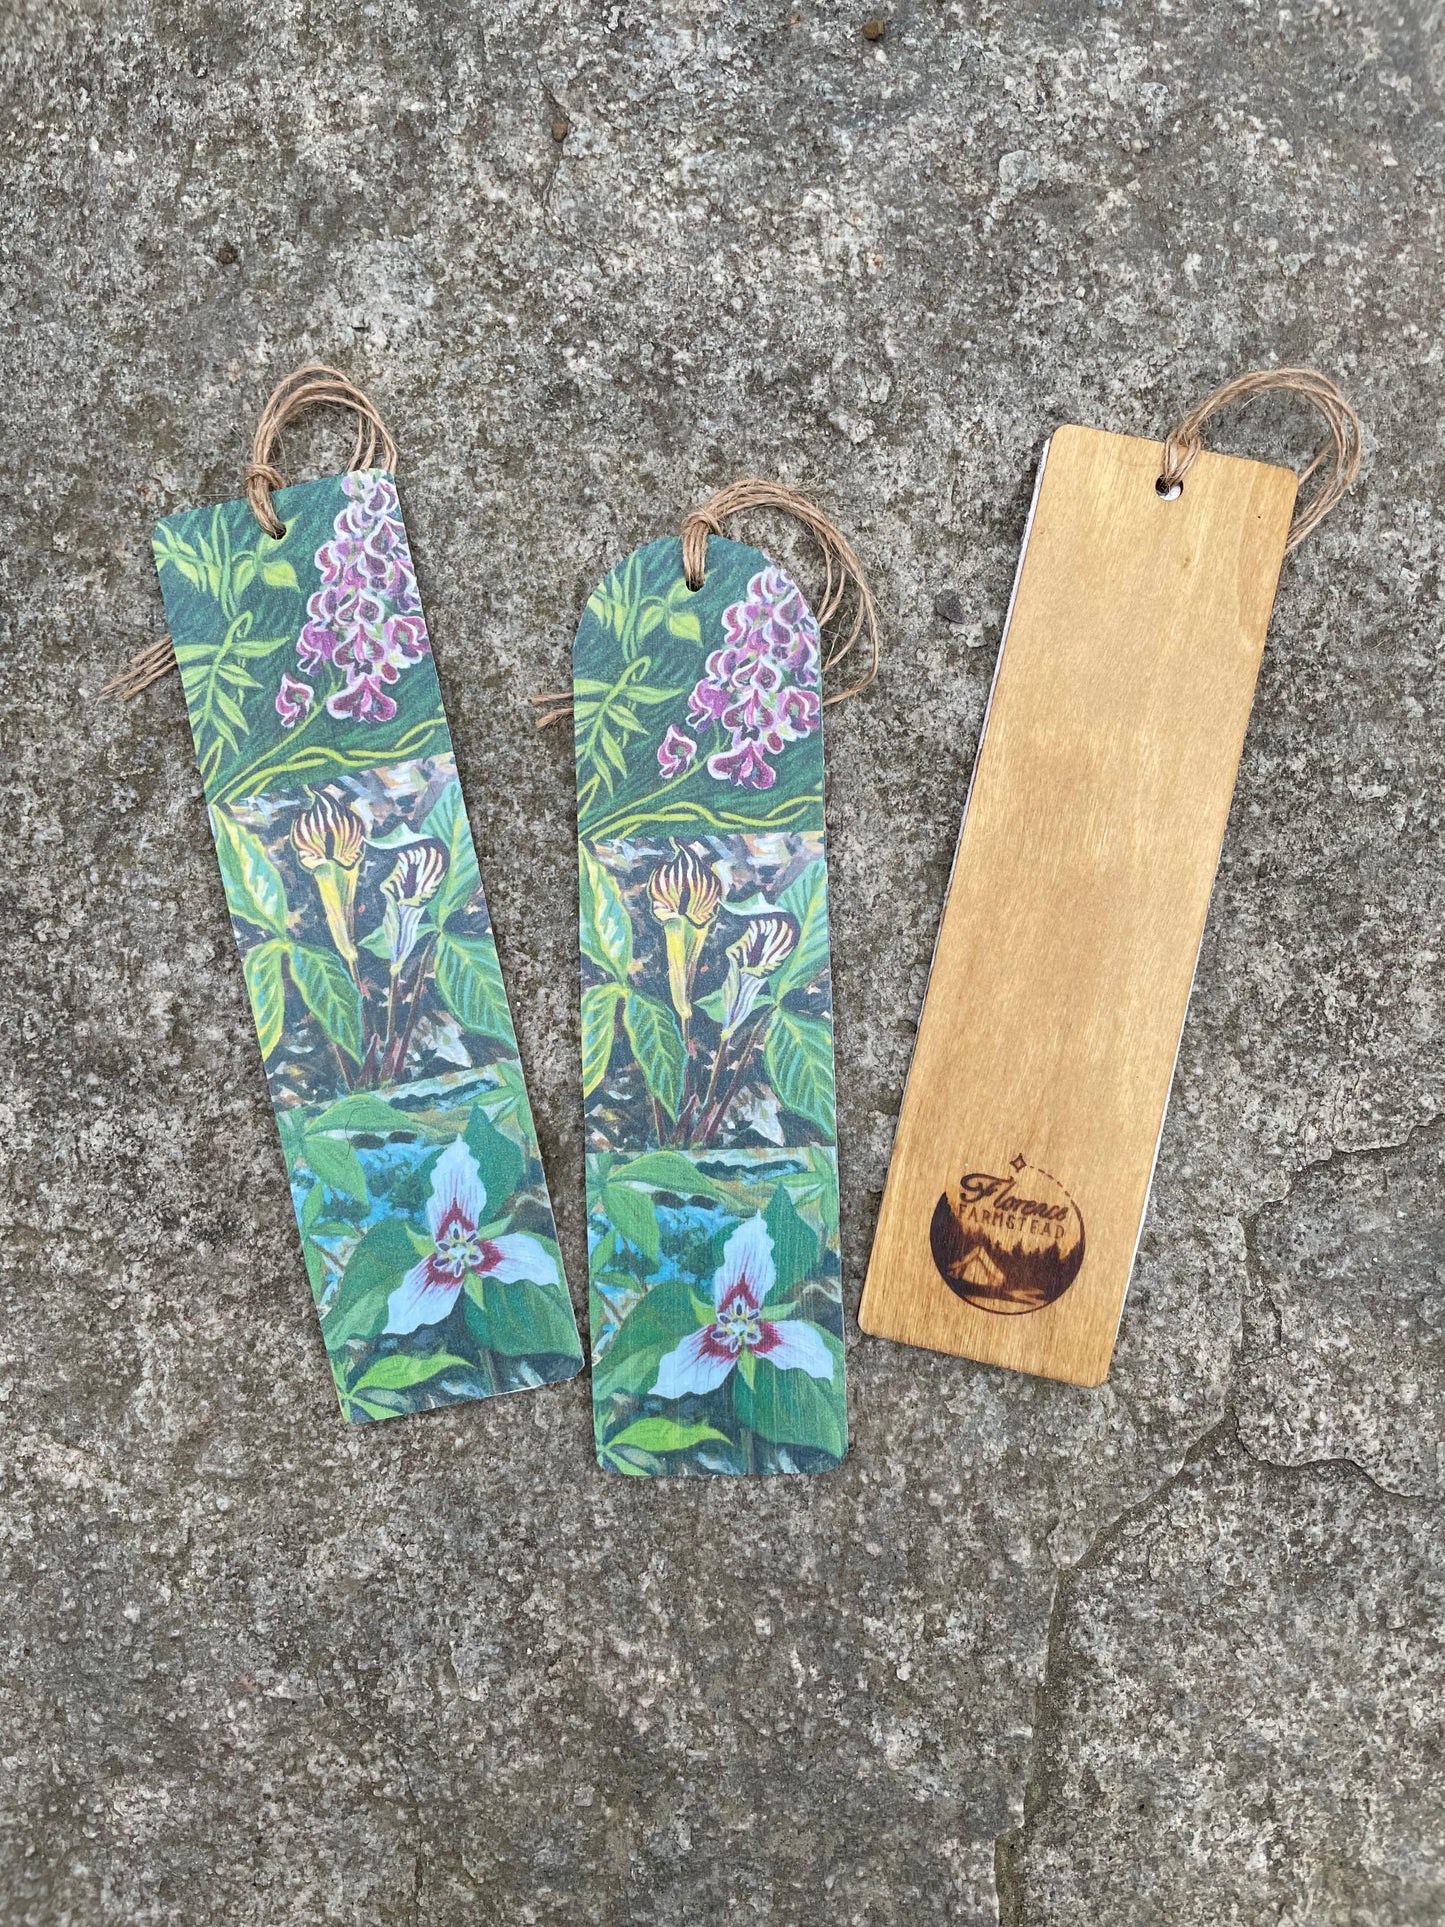 Maine wildflower bookmark with groundnut, jack-in-the-pulpit and trillium. Printed from original paintings by brandy cressey raymond and glued on wood.